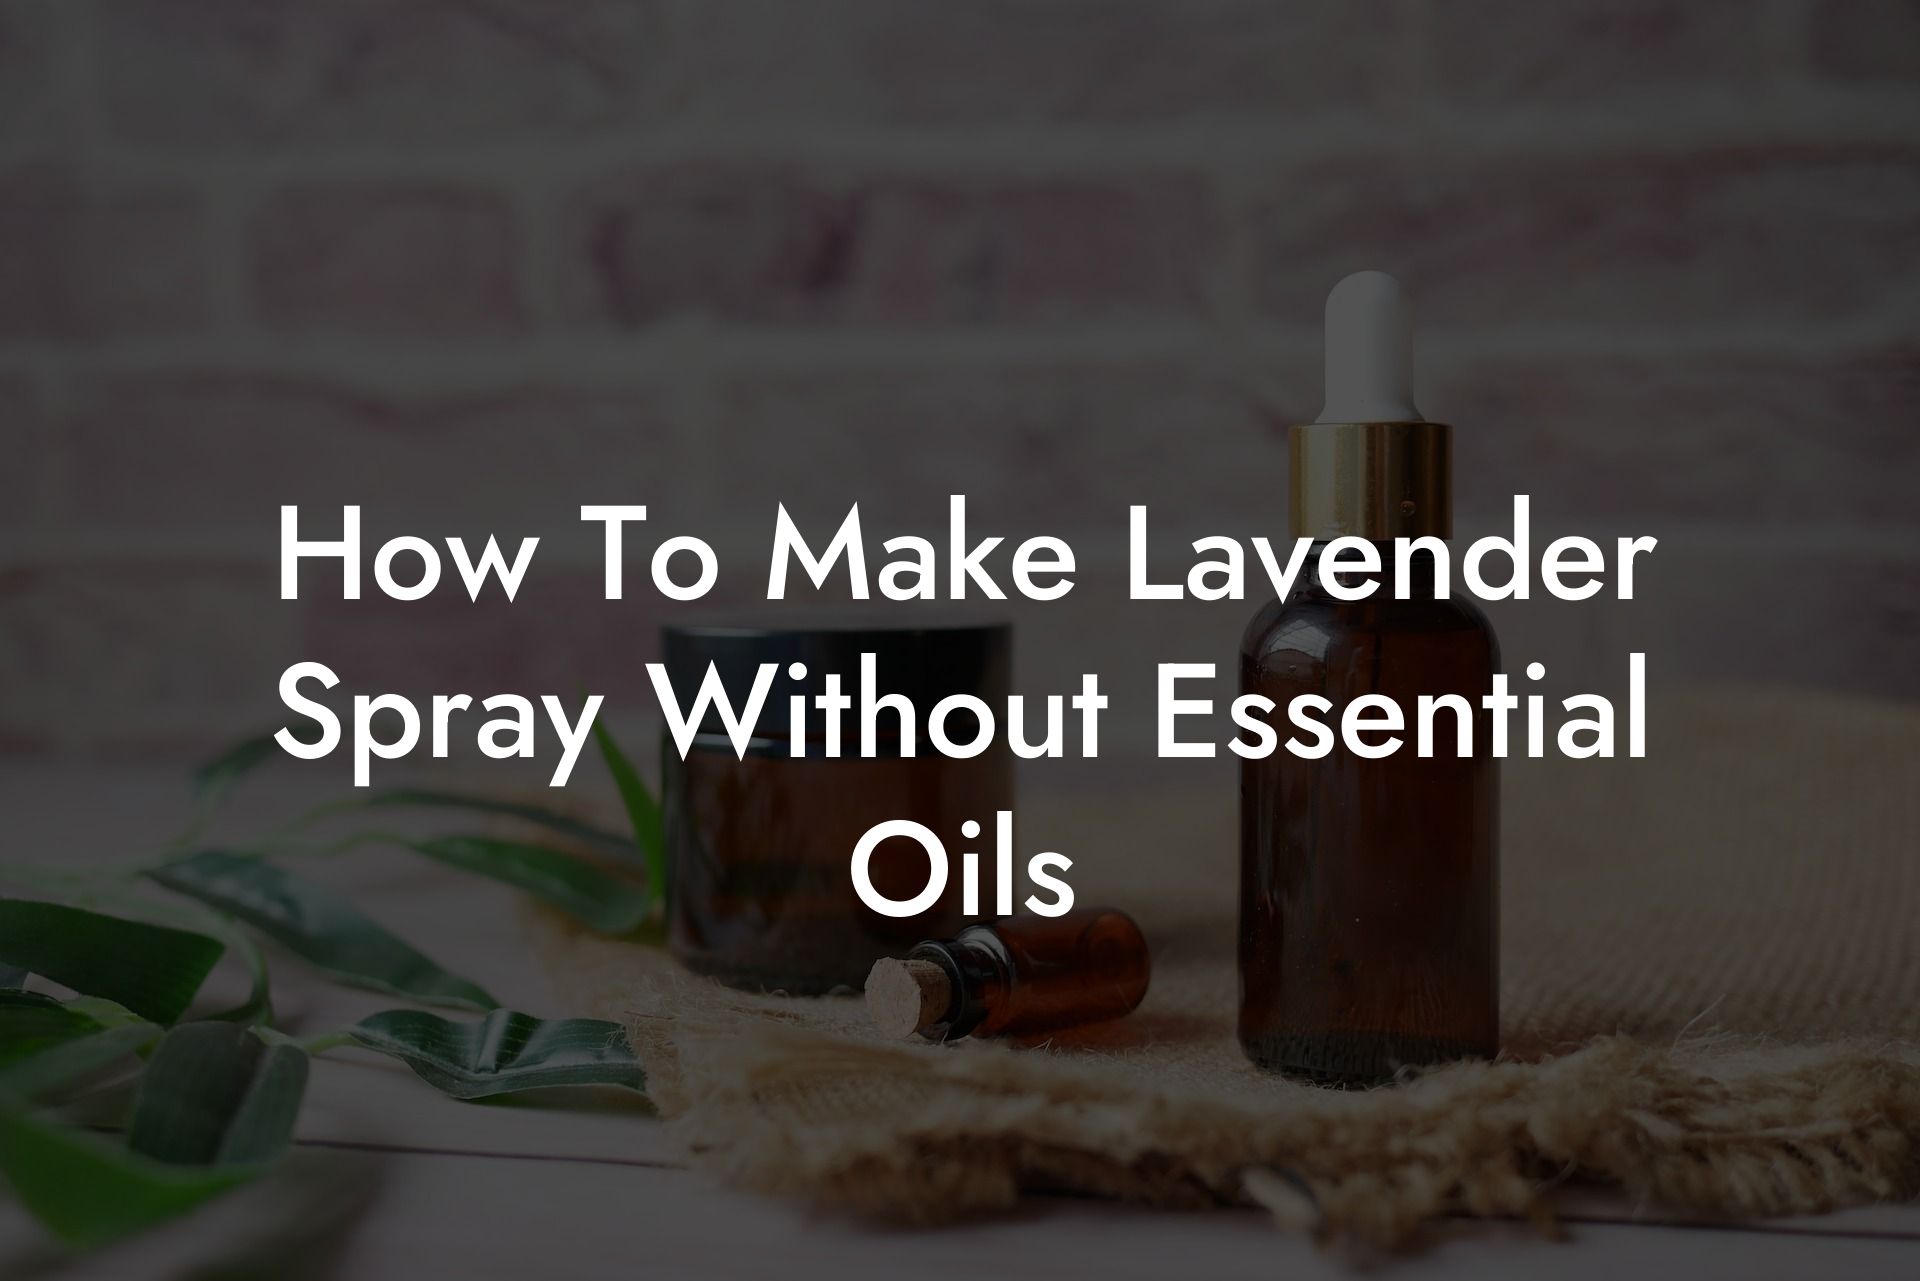 How To Make Lavender Spray Without Essential Oils